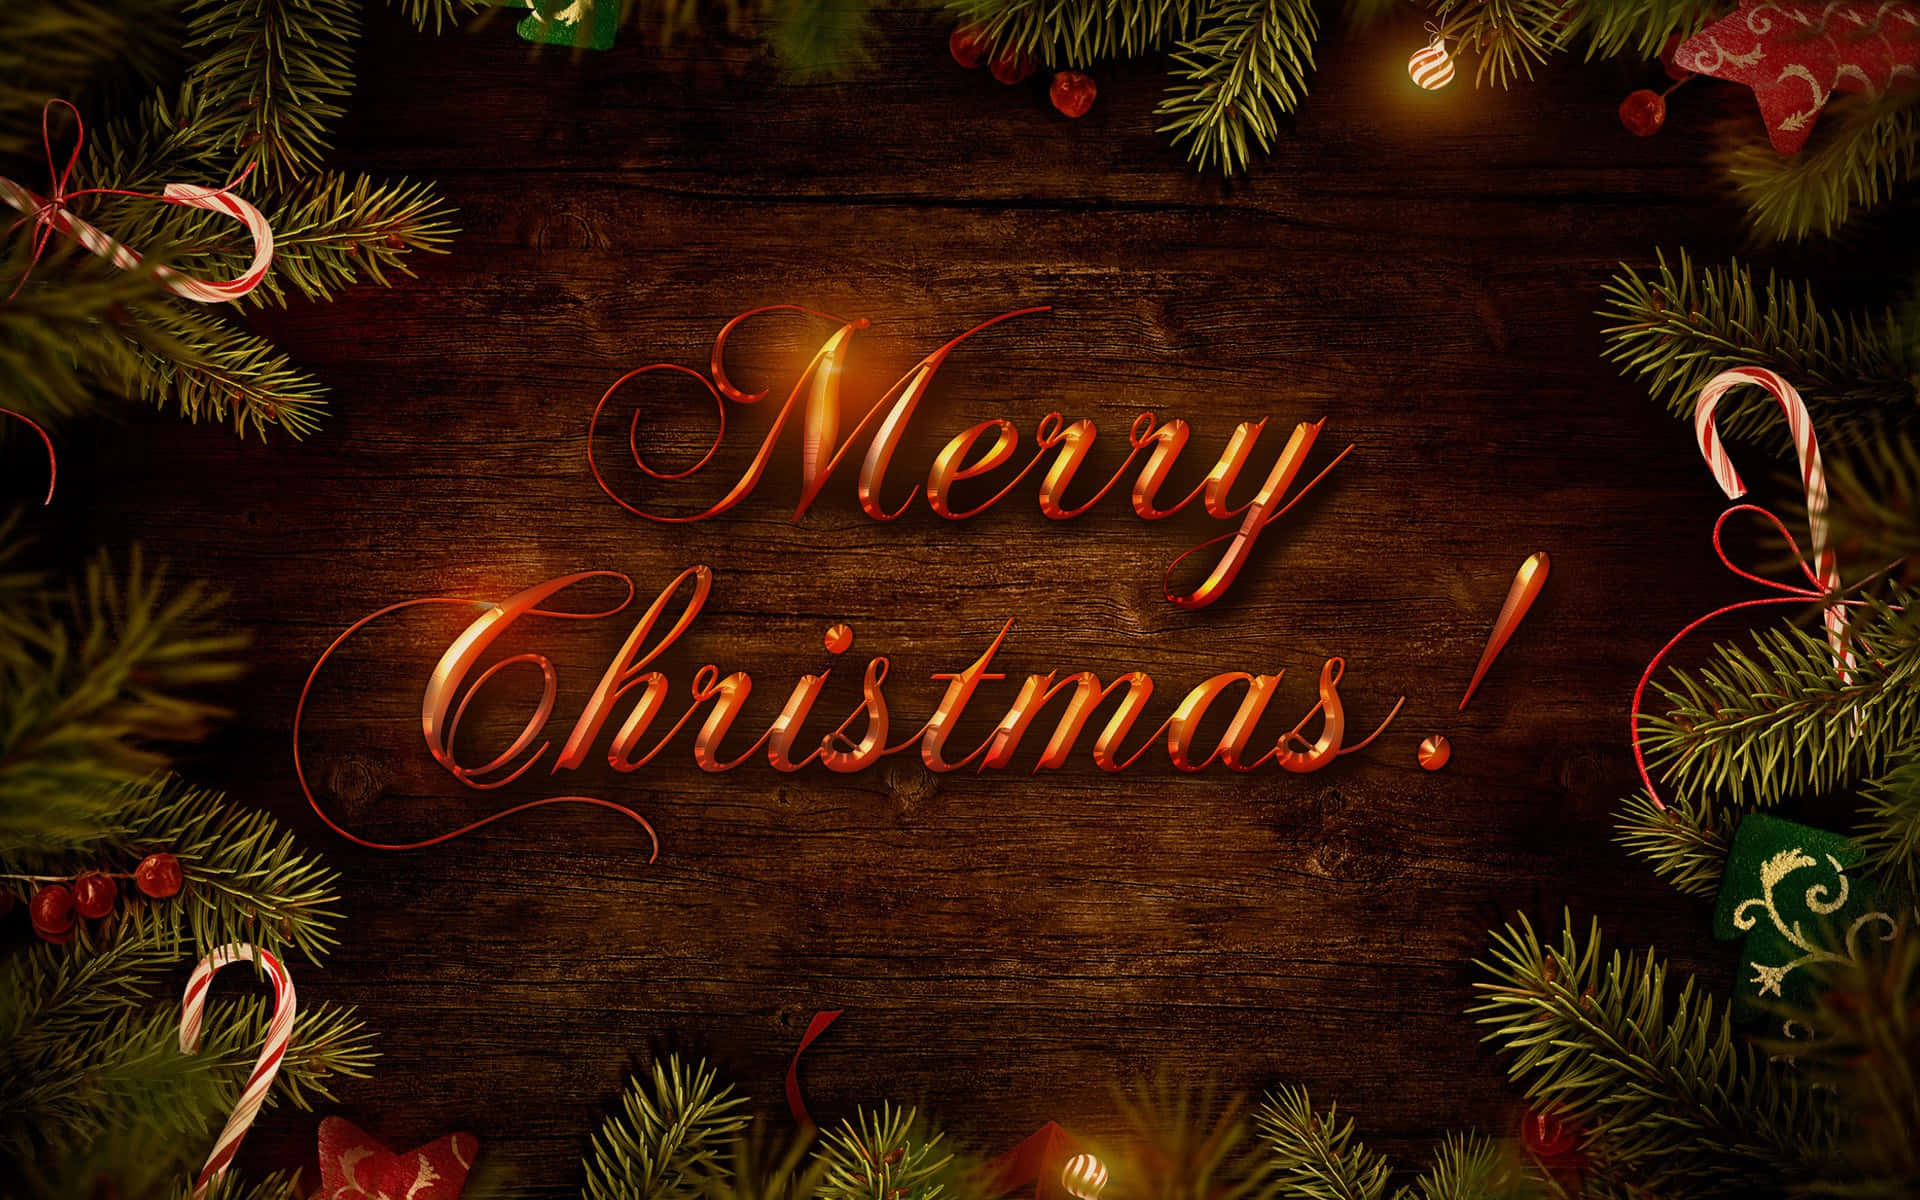 Wishing you a Merry Christmas full of joy and happiness